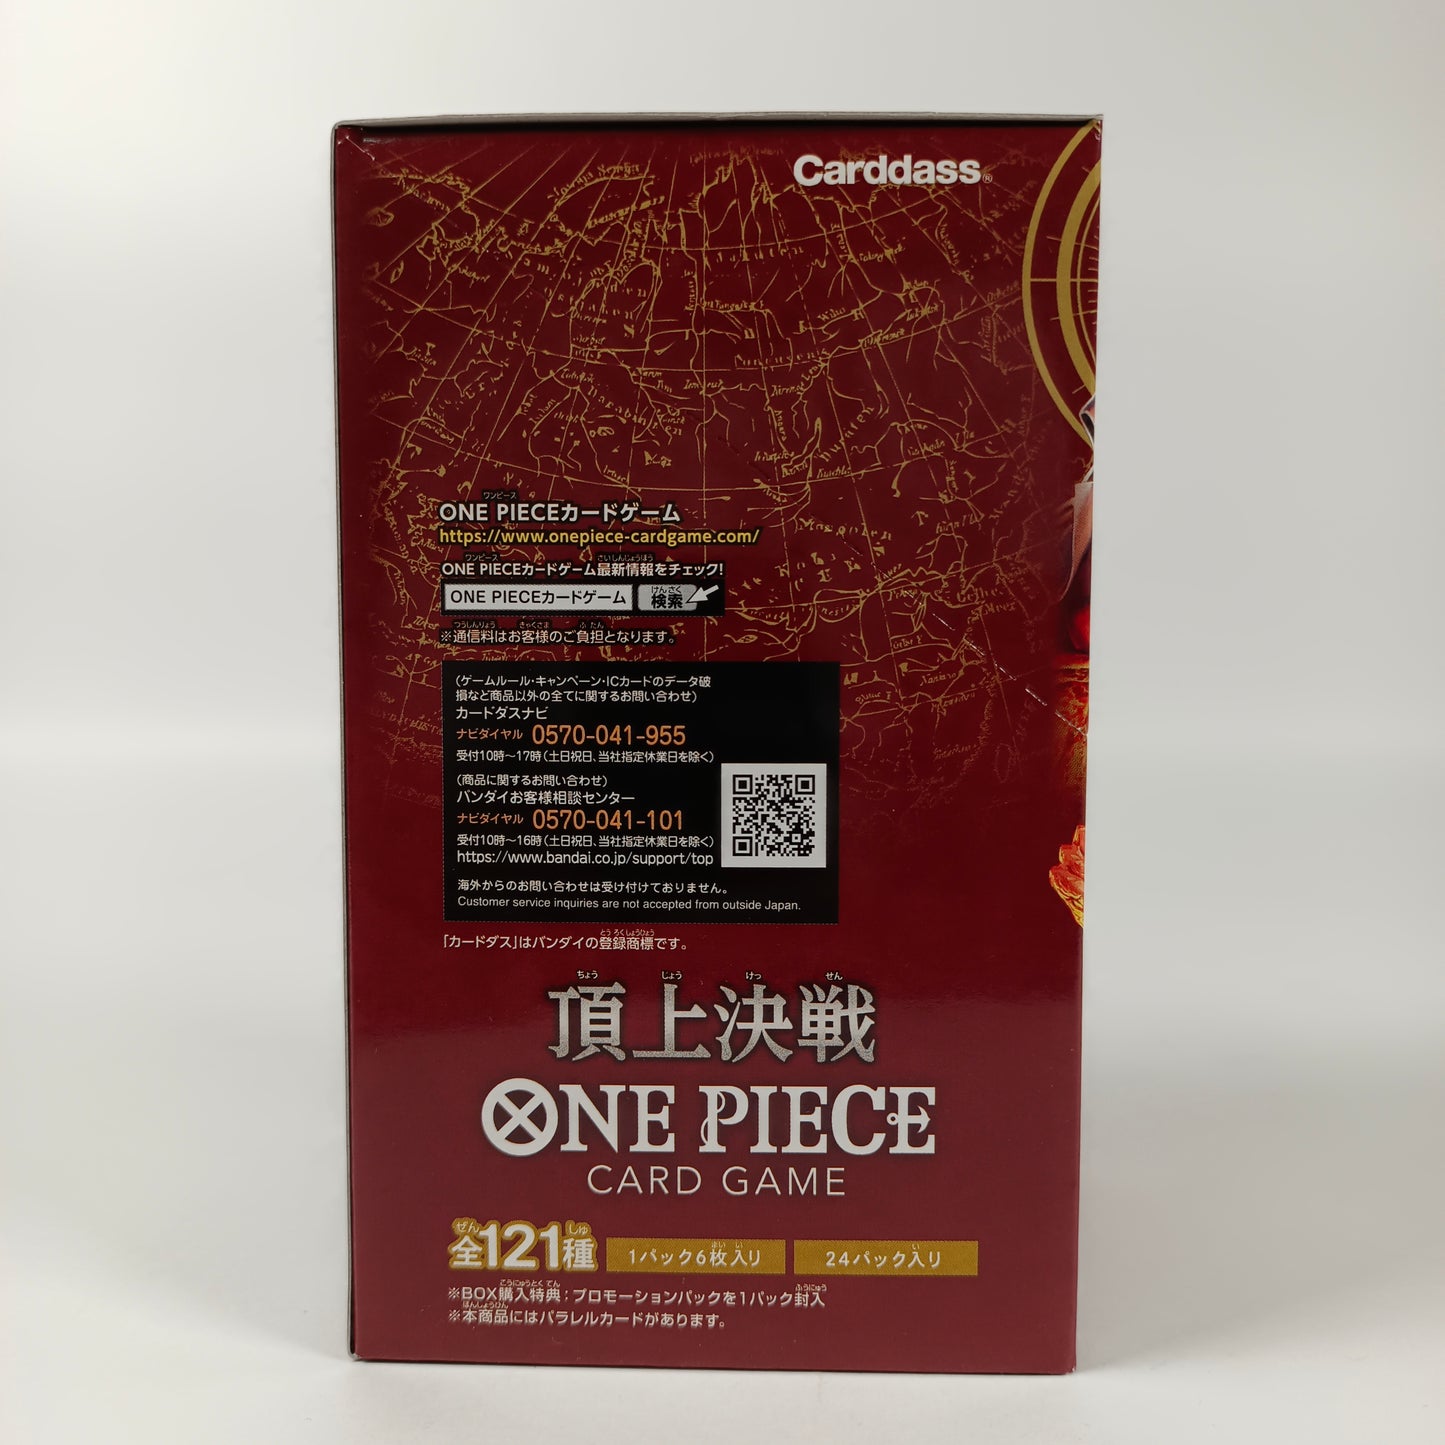 ONE PIECE CARD GAME OP02 BOX